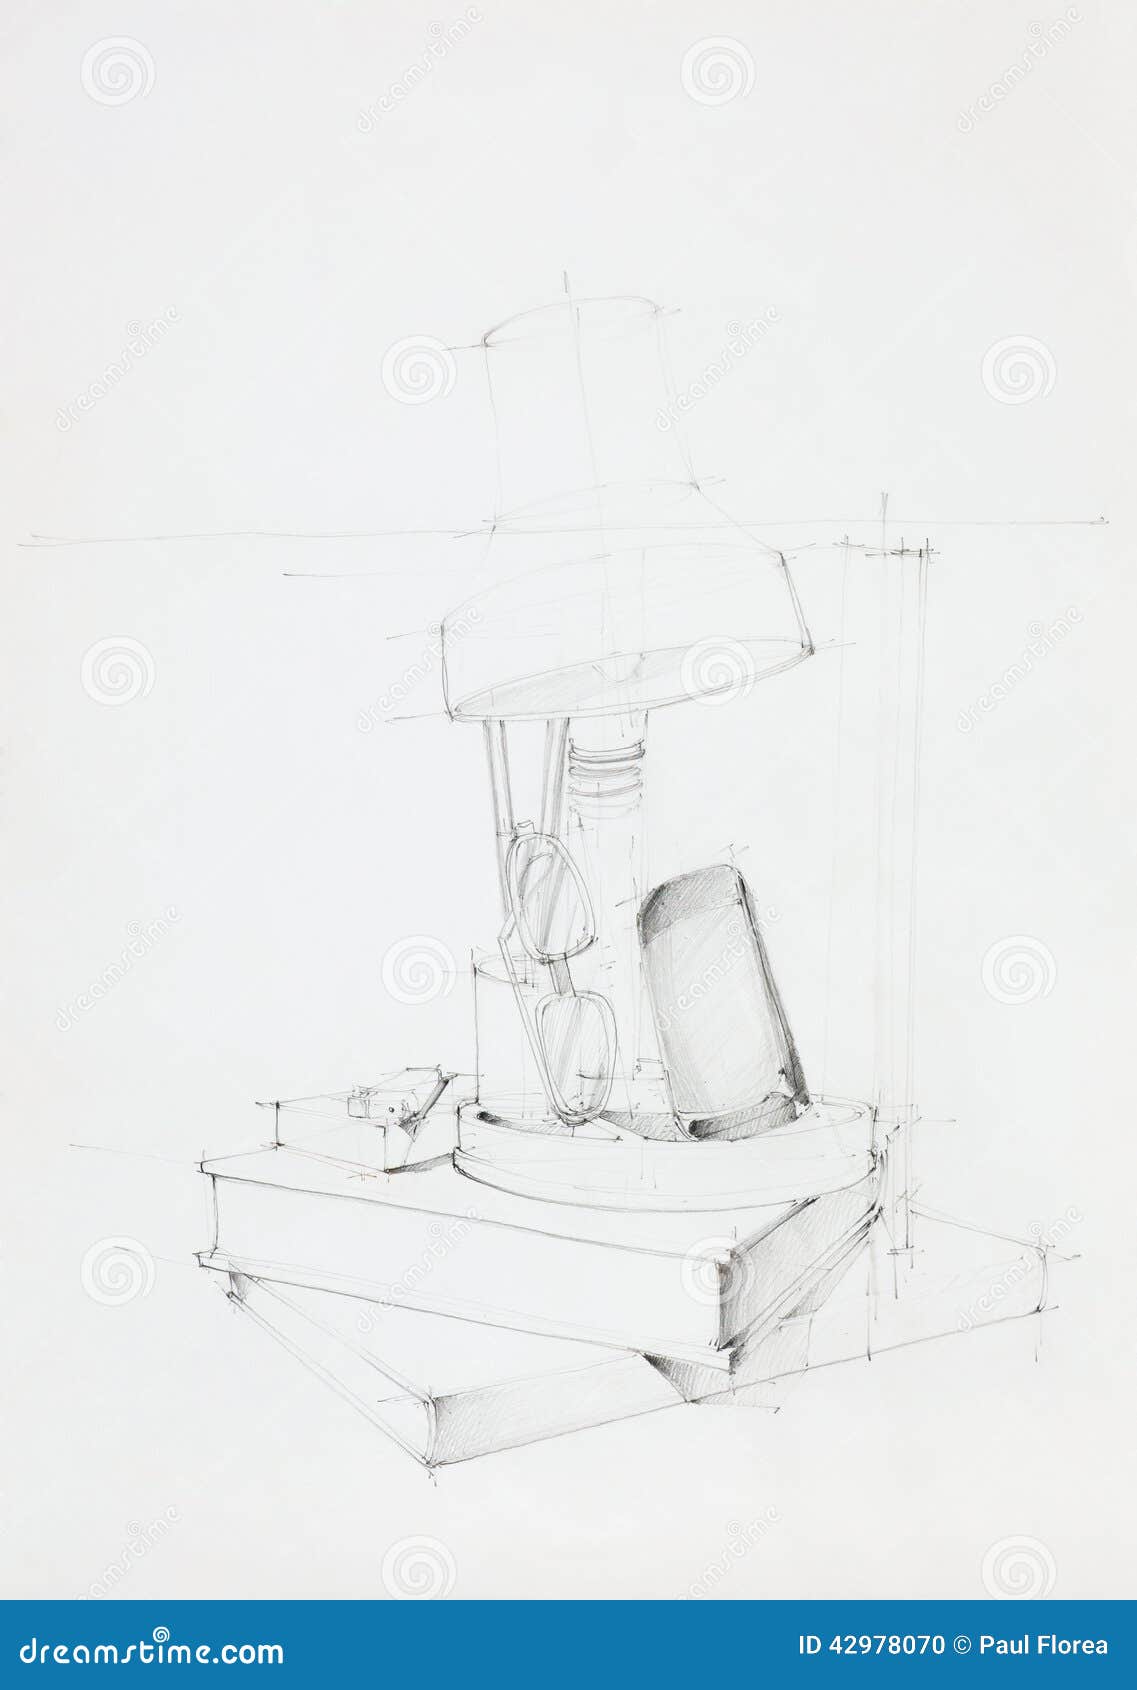 Still life Composition - 3. (Pencil Drawing). | PeakD